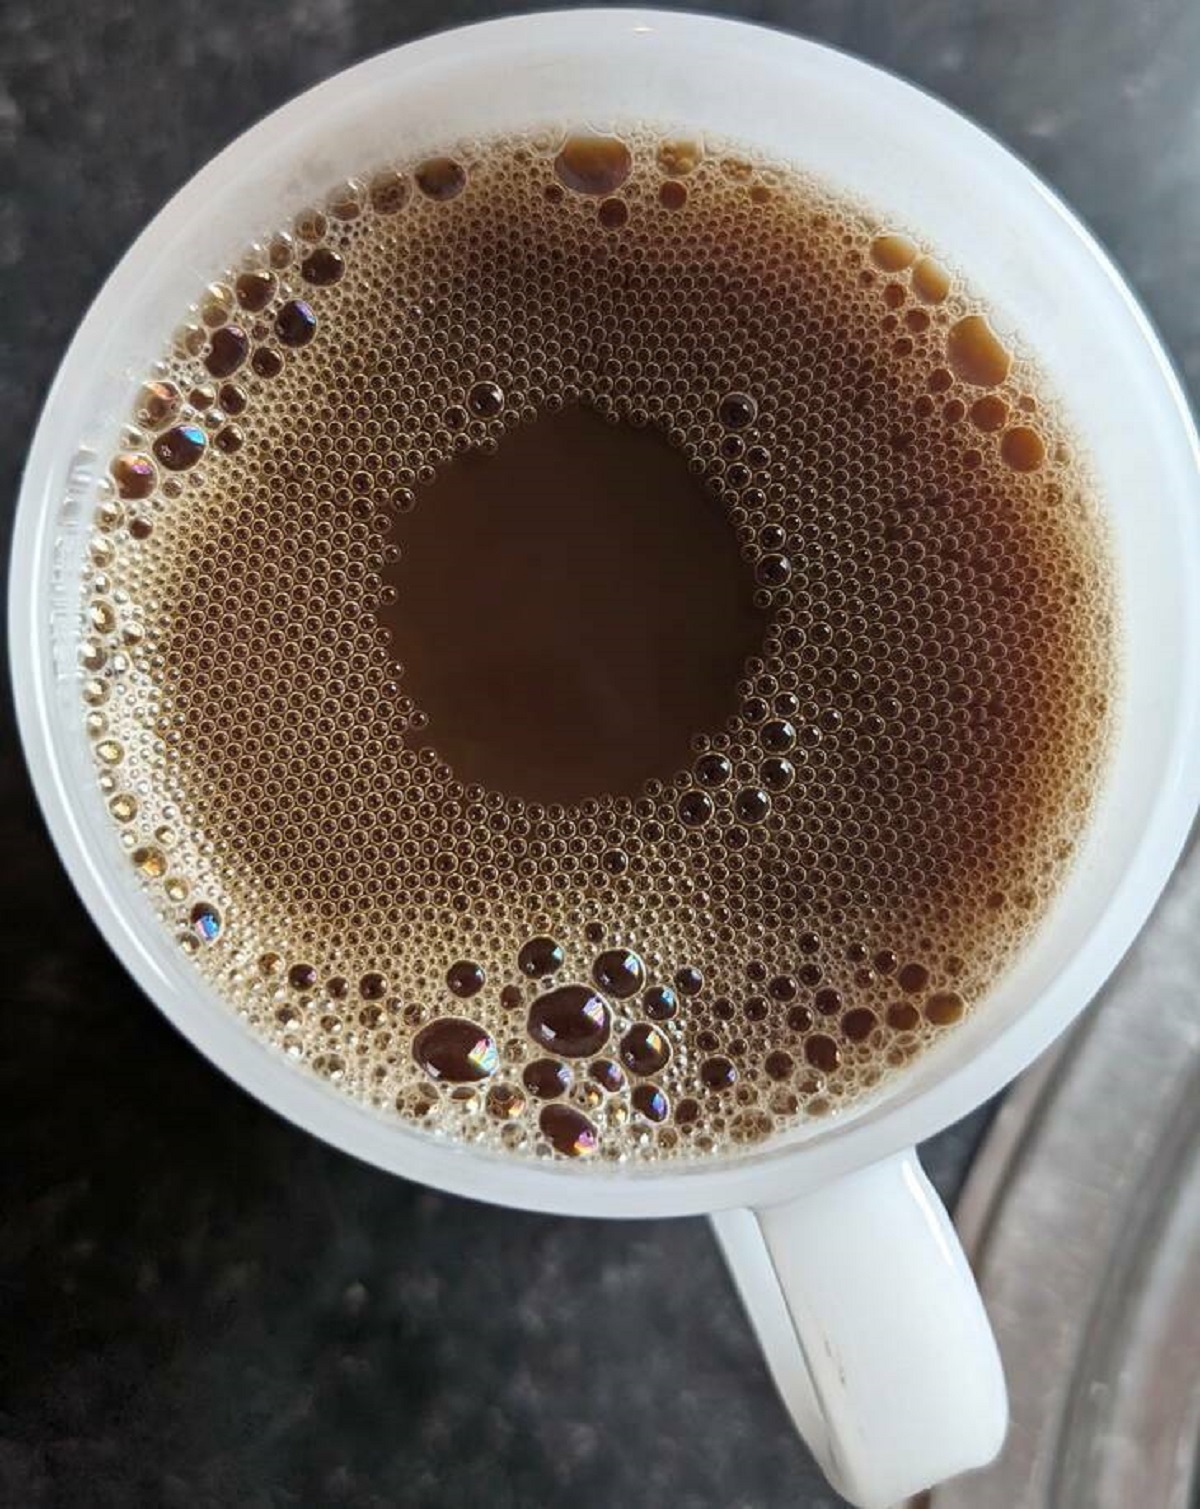 “Bubbles in my coffee this morning.”